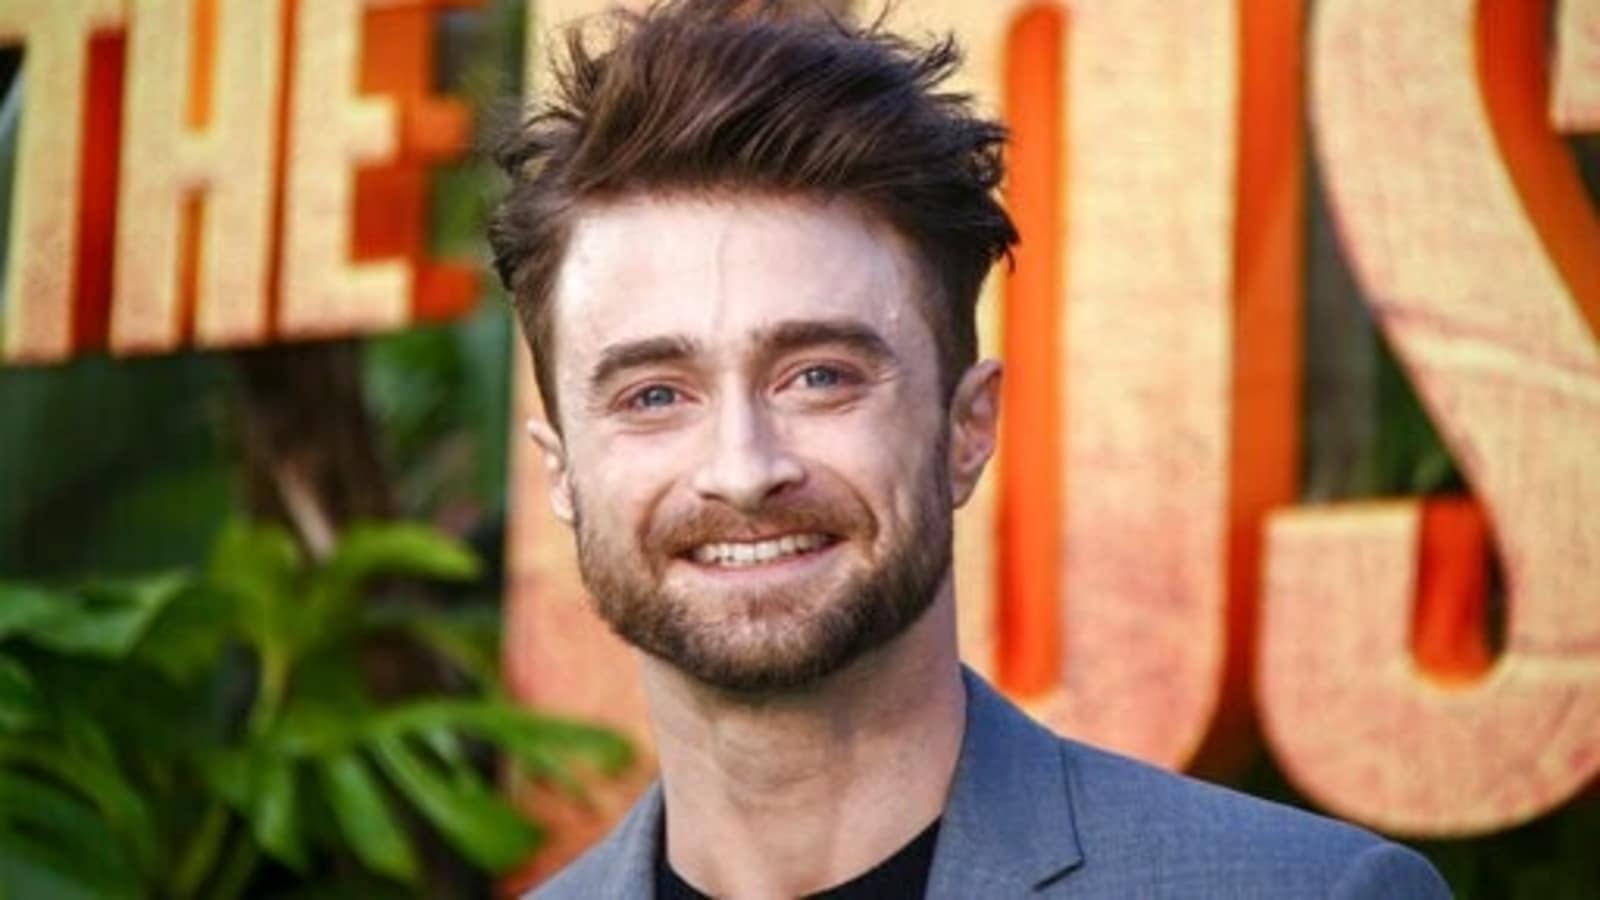 Daniel Radcliffe ‘dramatically bored’ of Oscar drama with Will Smith and Chris Rock, recalls own experience